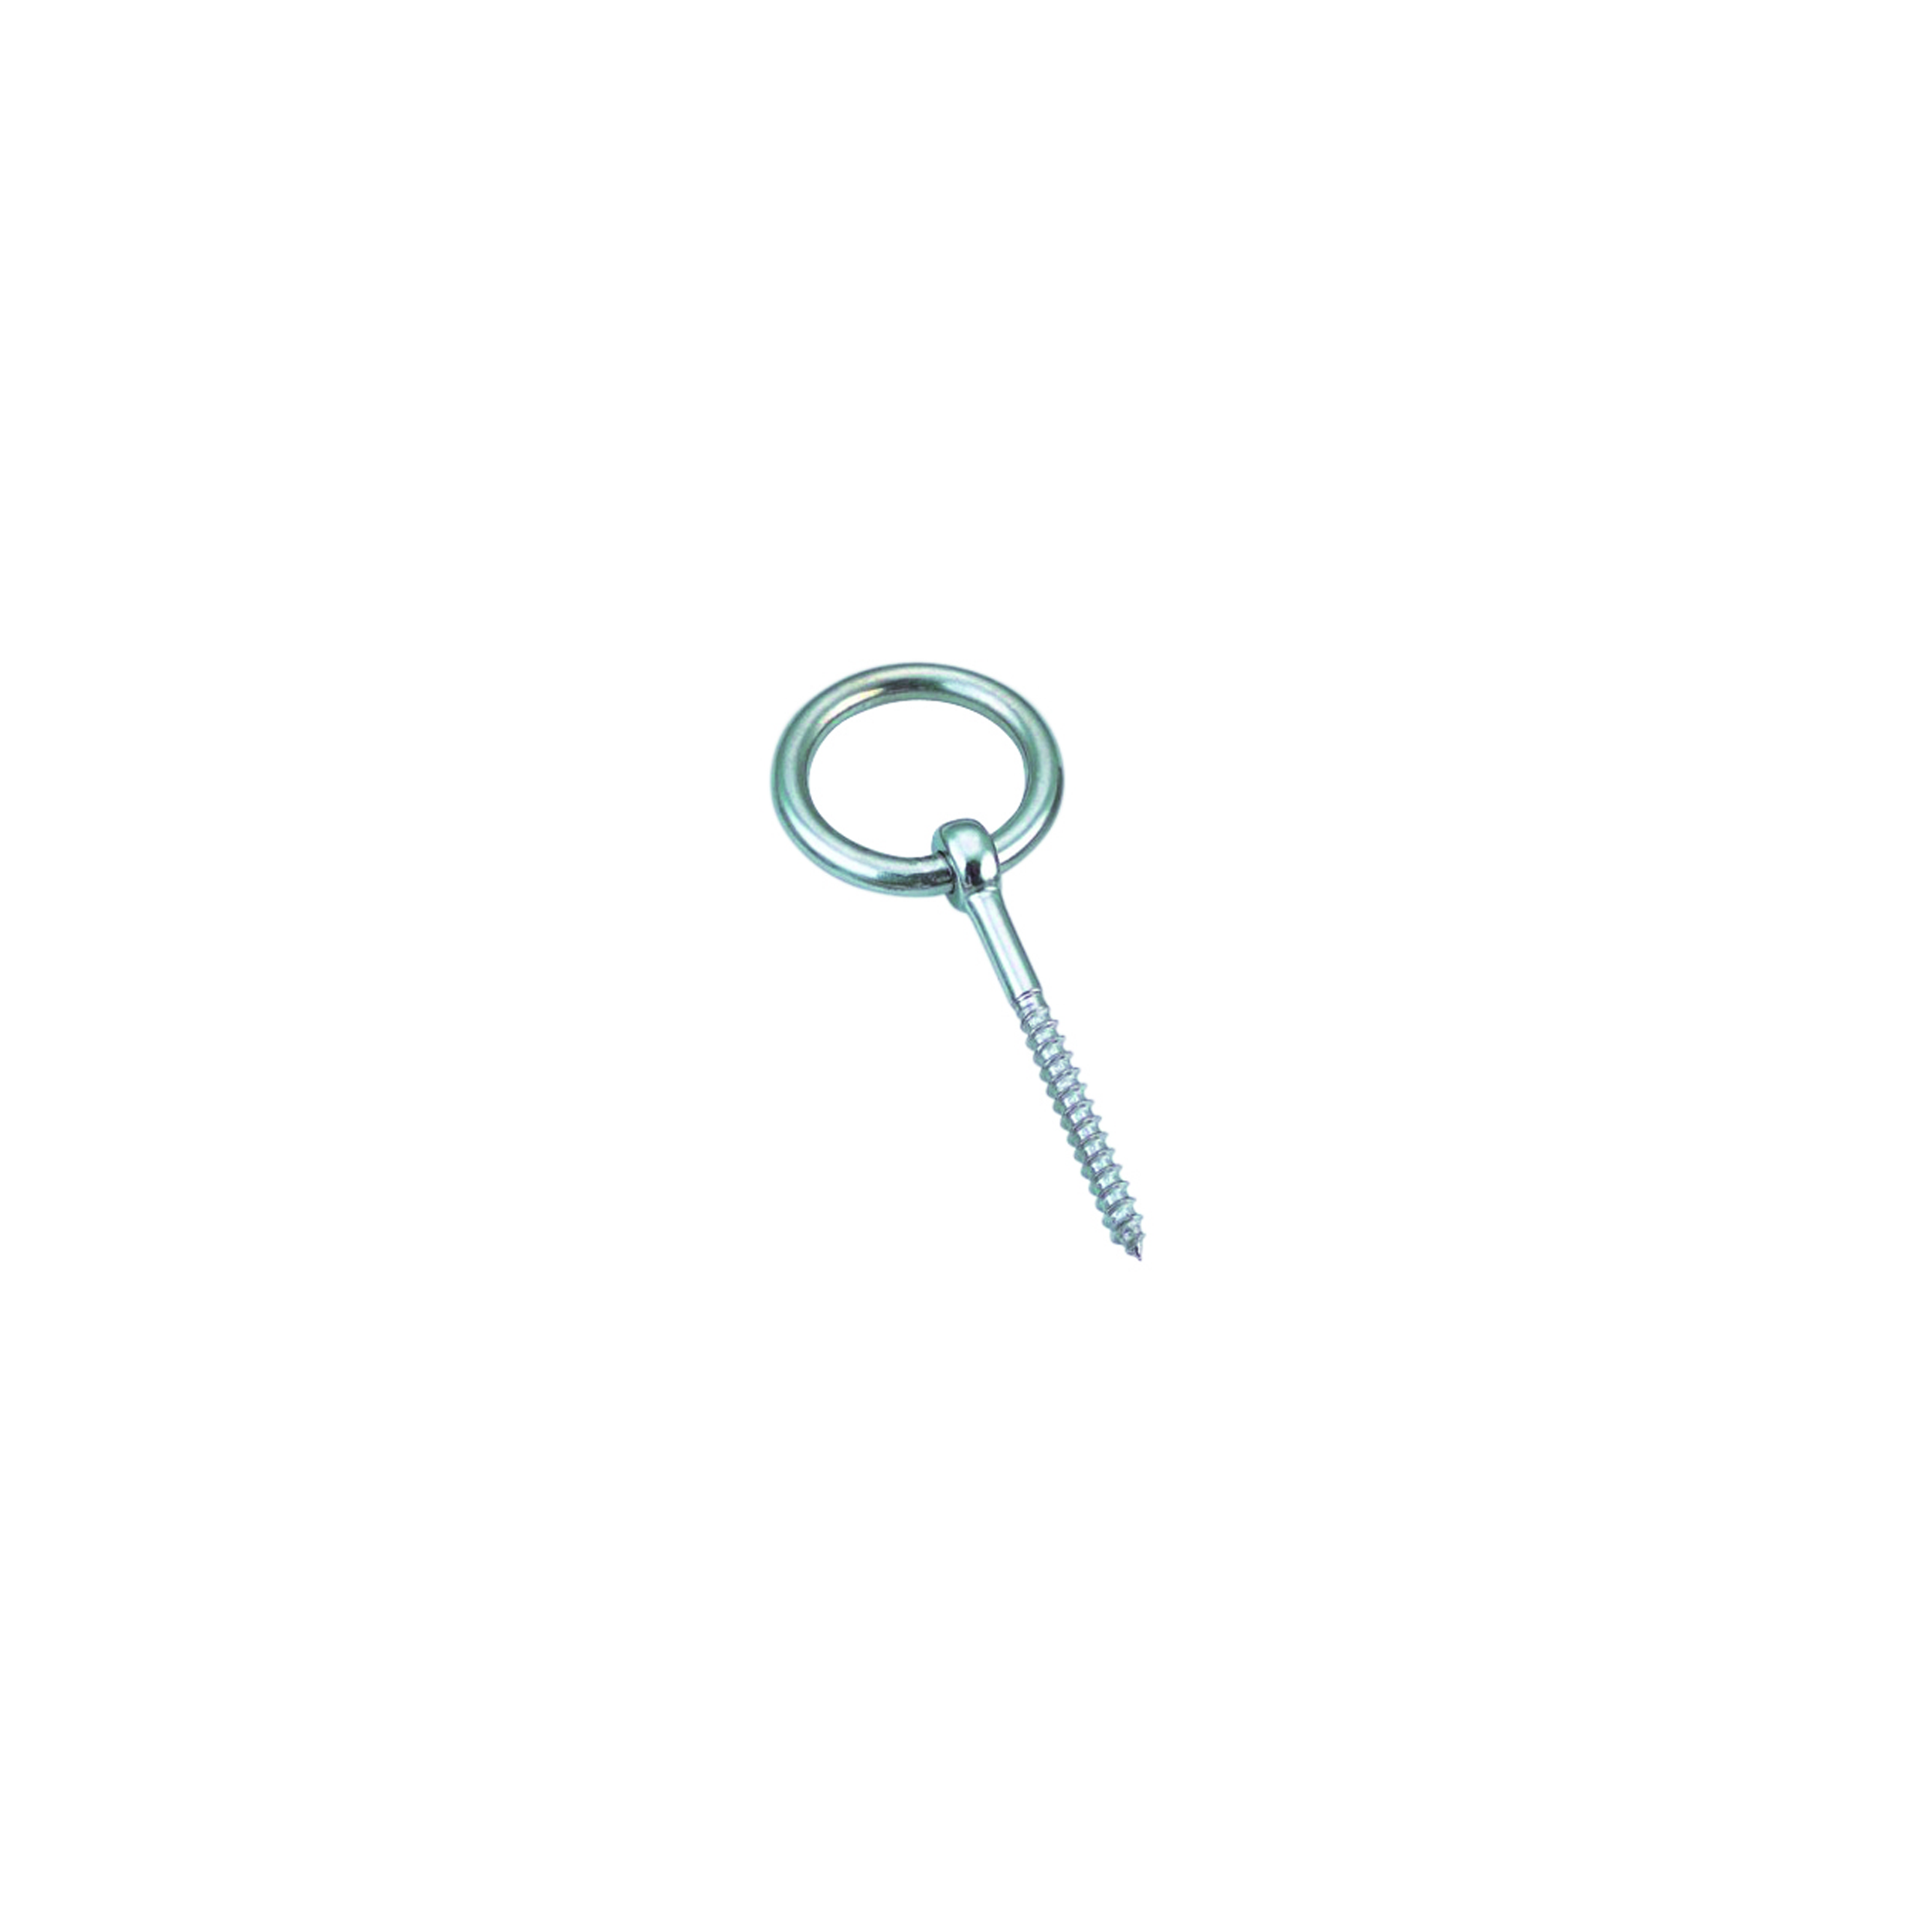 Eyebolt with wood thread and ring A4  bolt 10x100mm, ring 10x60mm